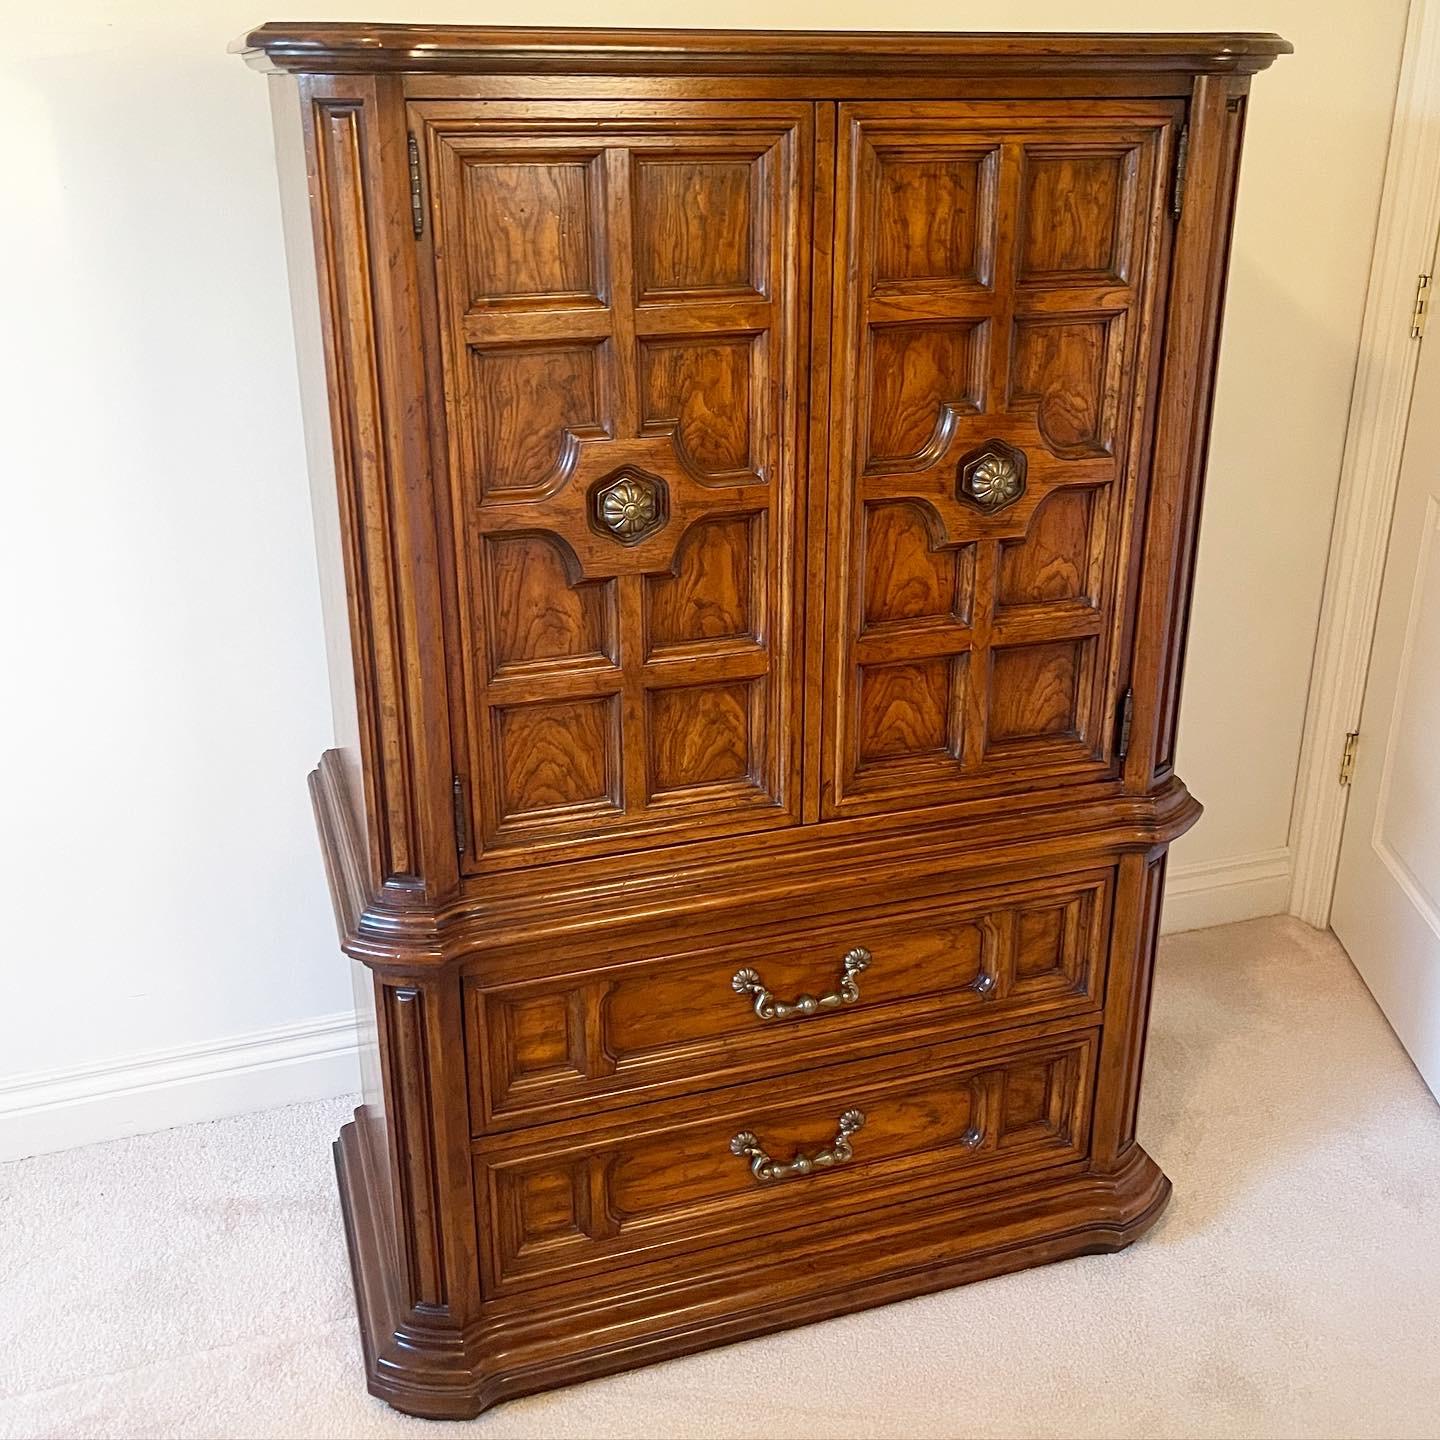 Incredible vintage Maracay armoire by Drexel Heritage. Features two large spacious drawers and two ornate cabinet doors which open to reveal shelving with drawers.